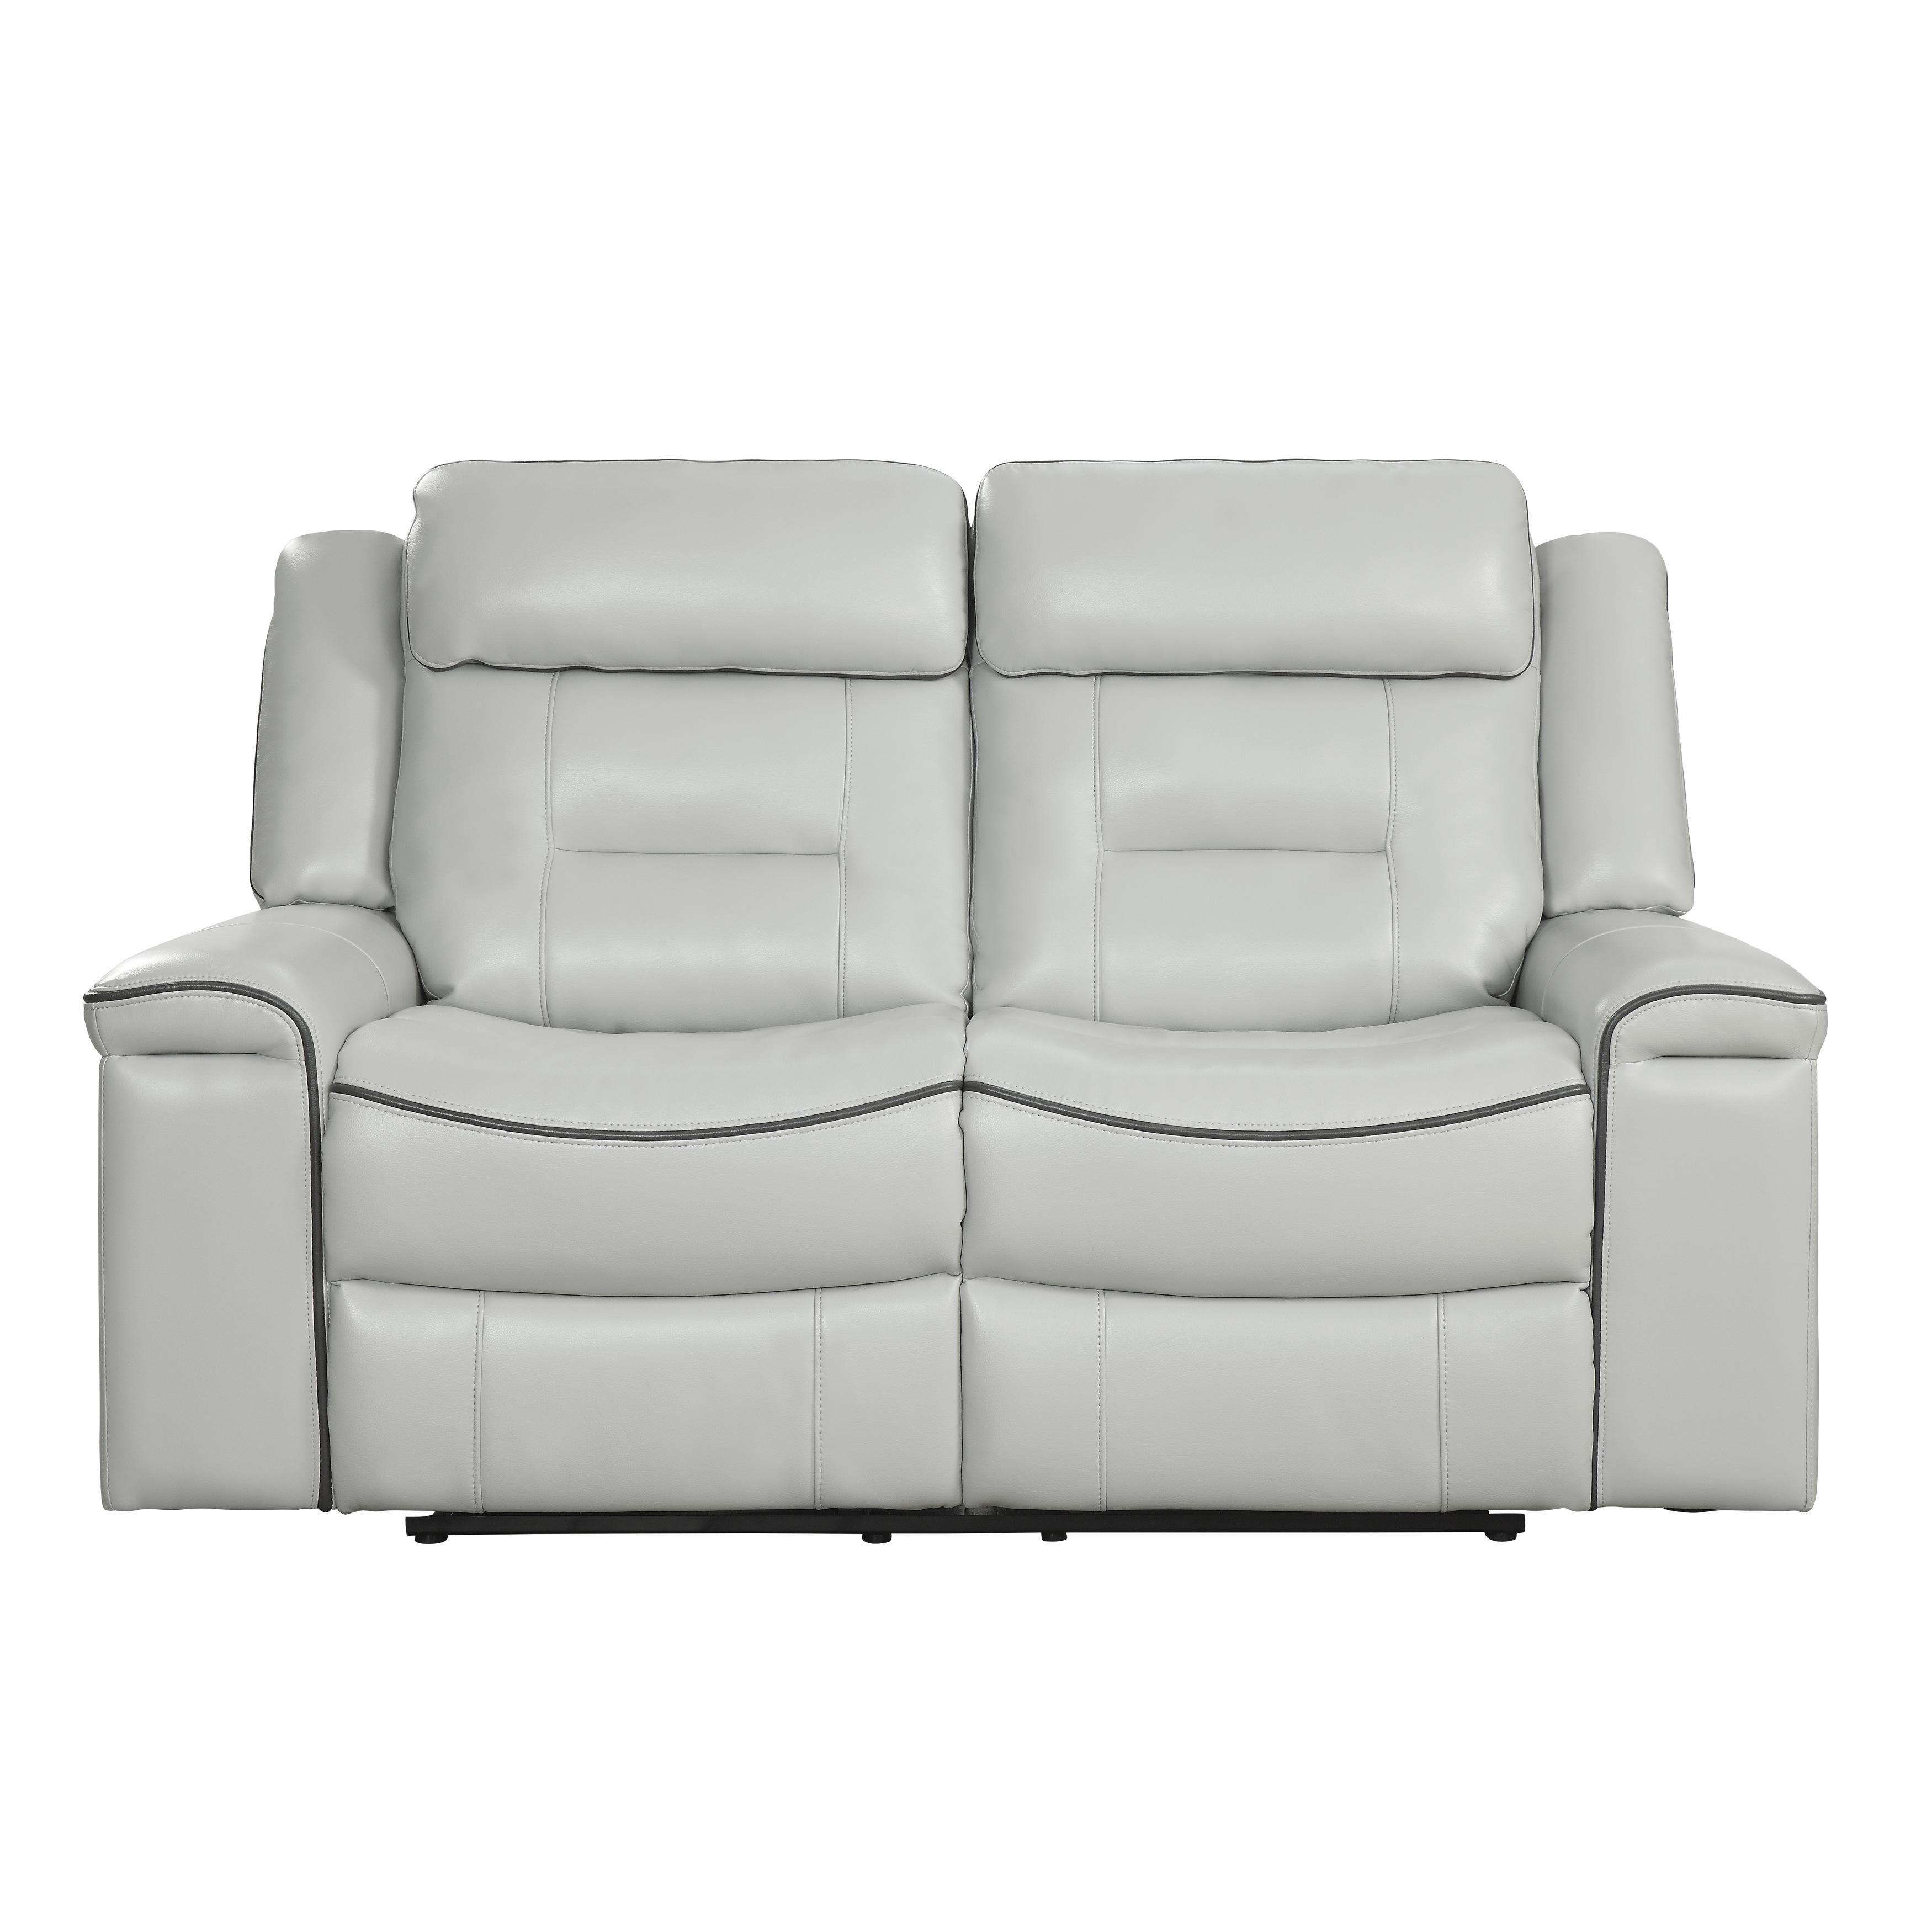 Contemporary Reclining Loveseat 9999GY-2 Darwan 9999GY-2 in Light Gray Faux Leather